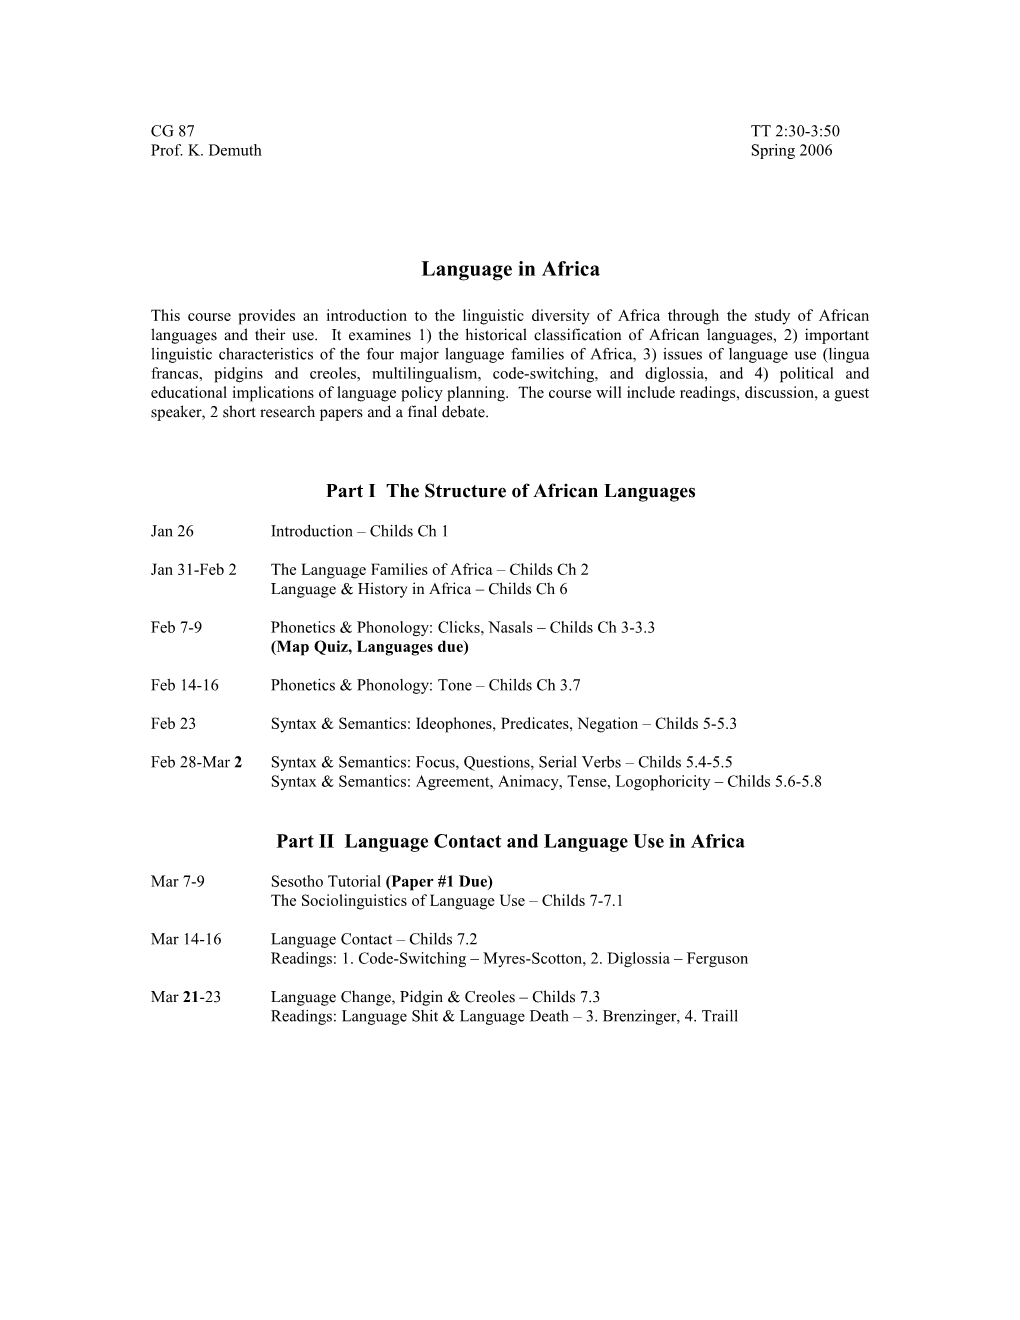 Part I the Structure of African Languages